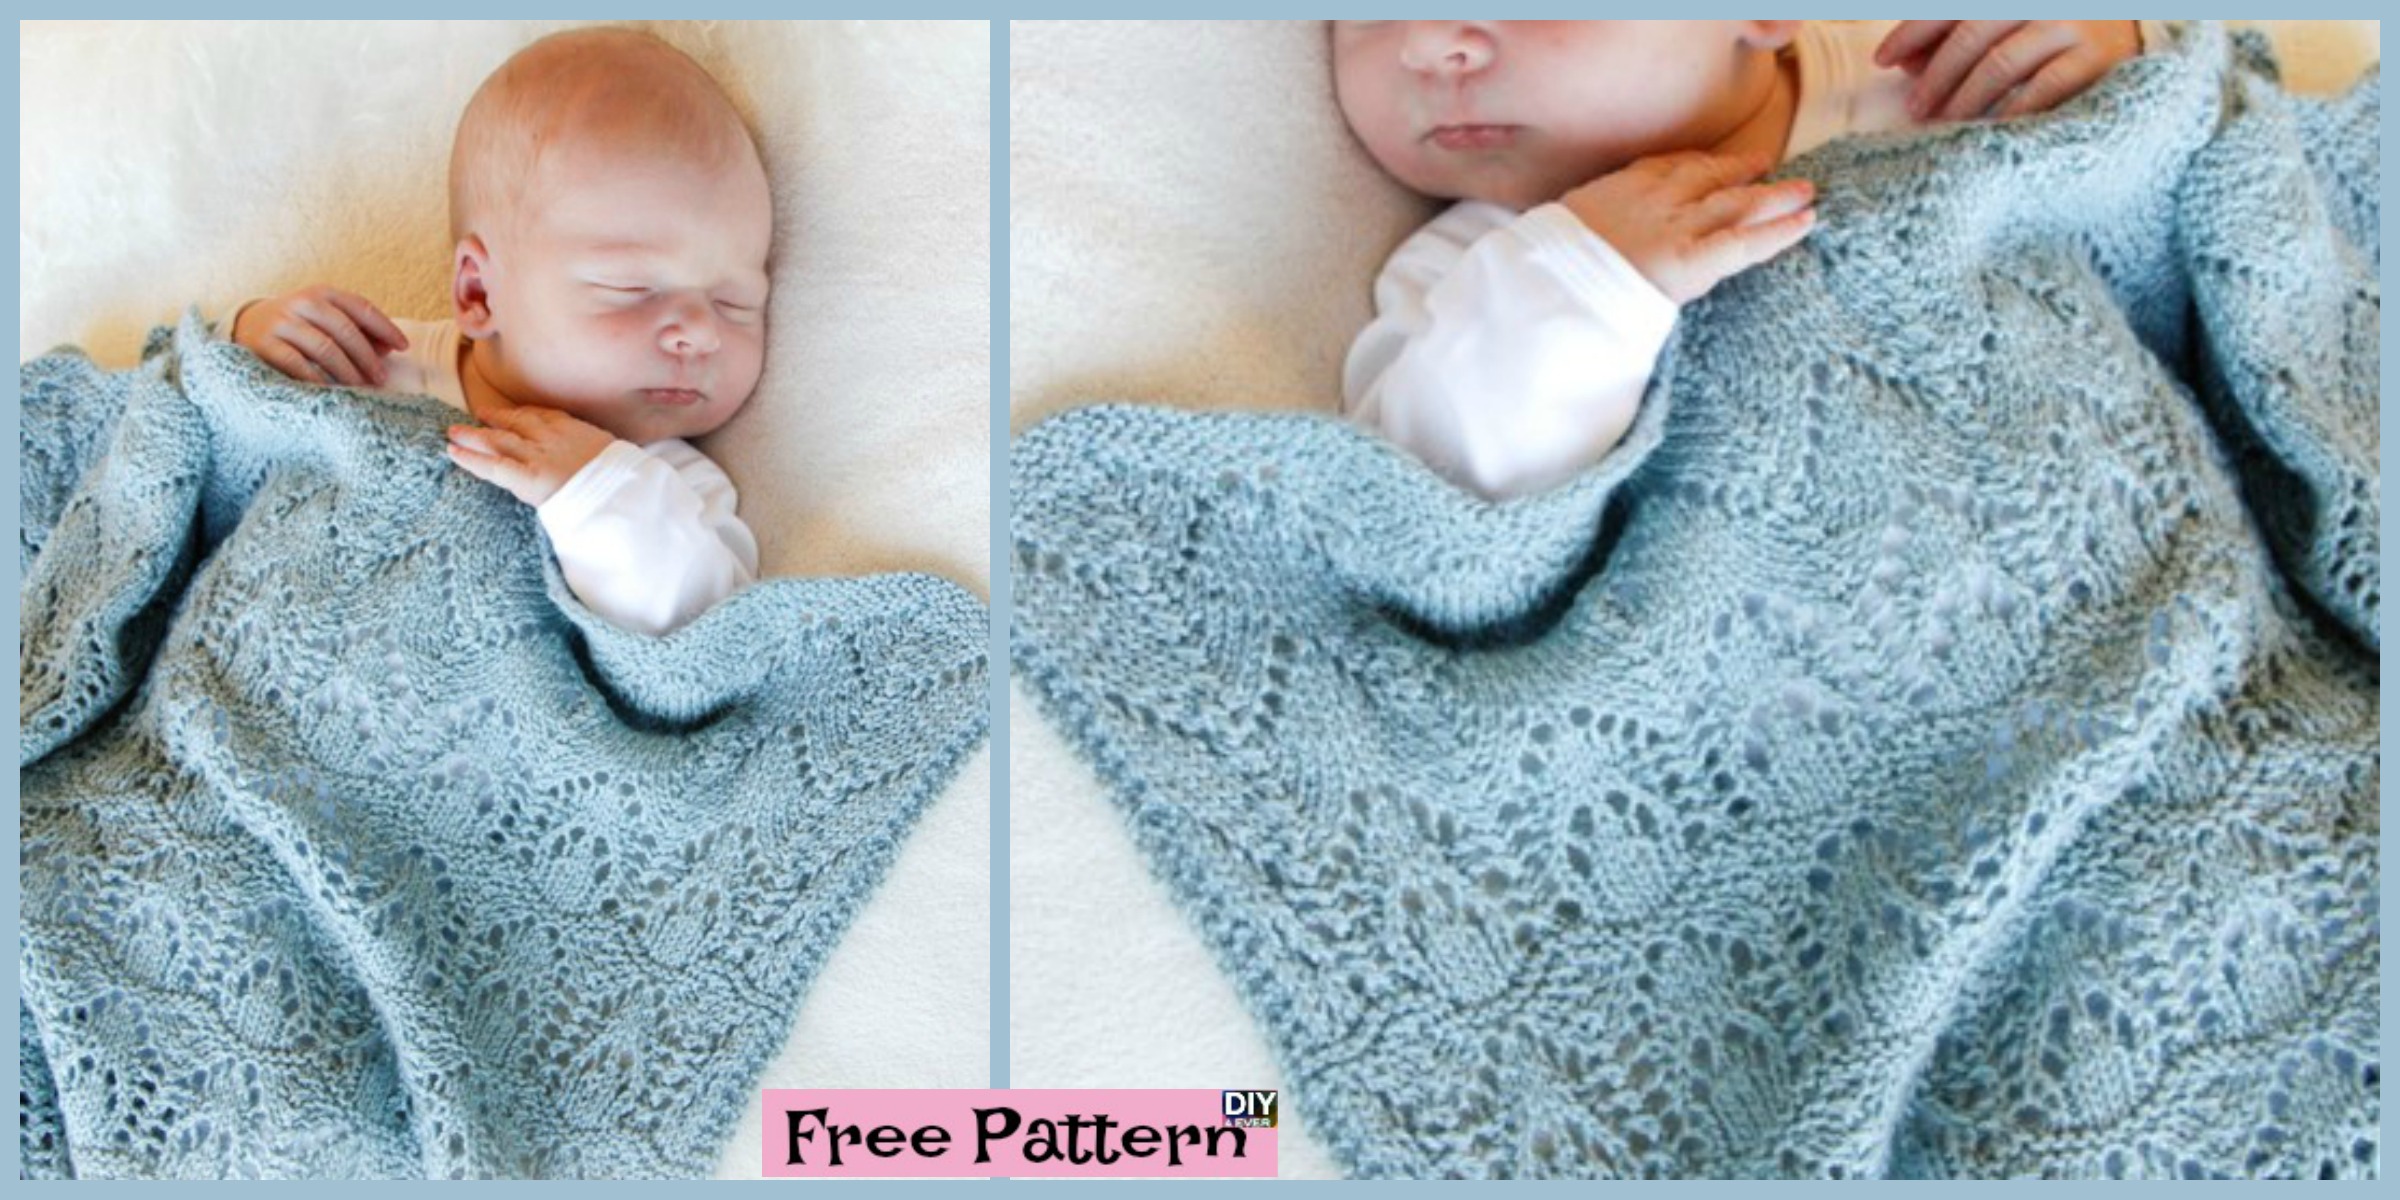 Knitted Baby Lace Blanket  – Free Pattern